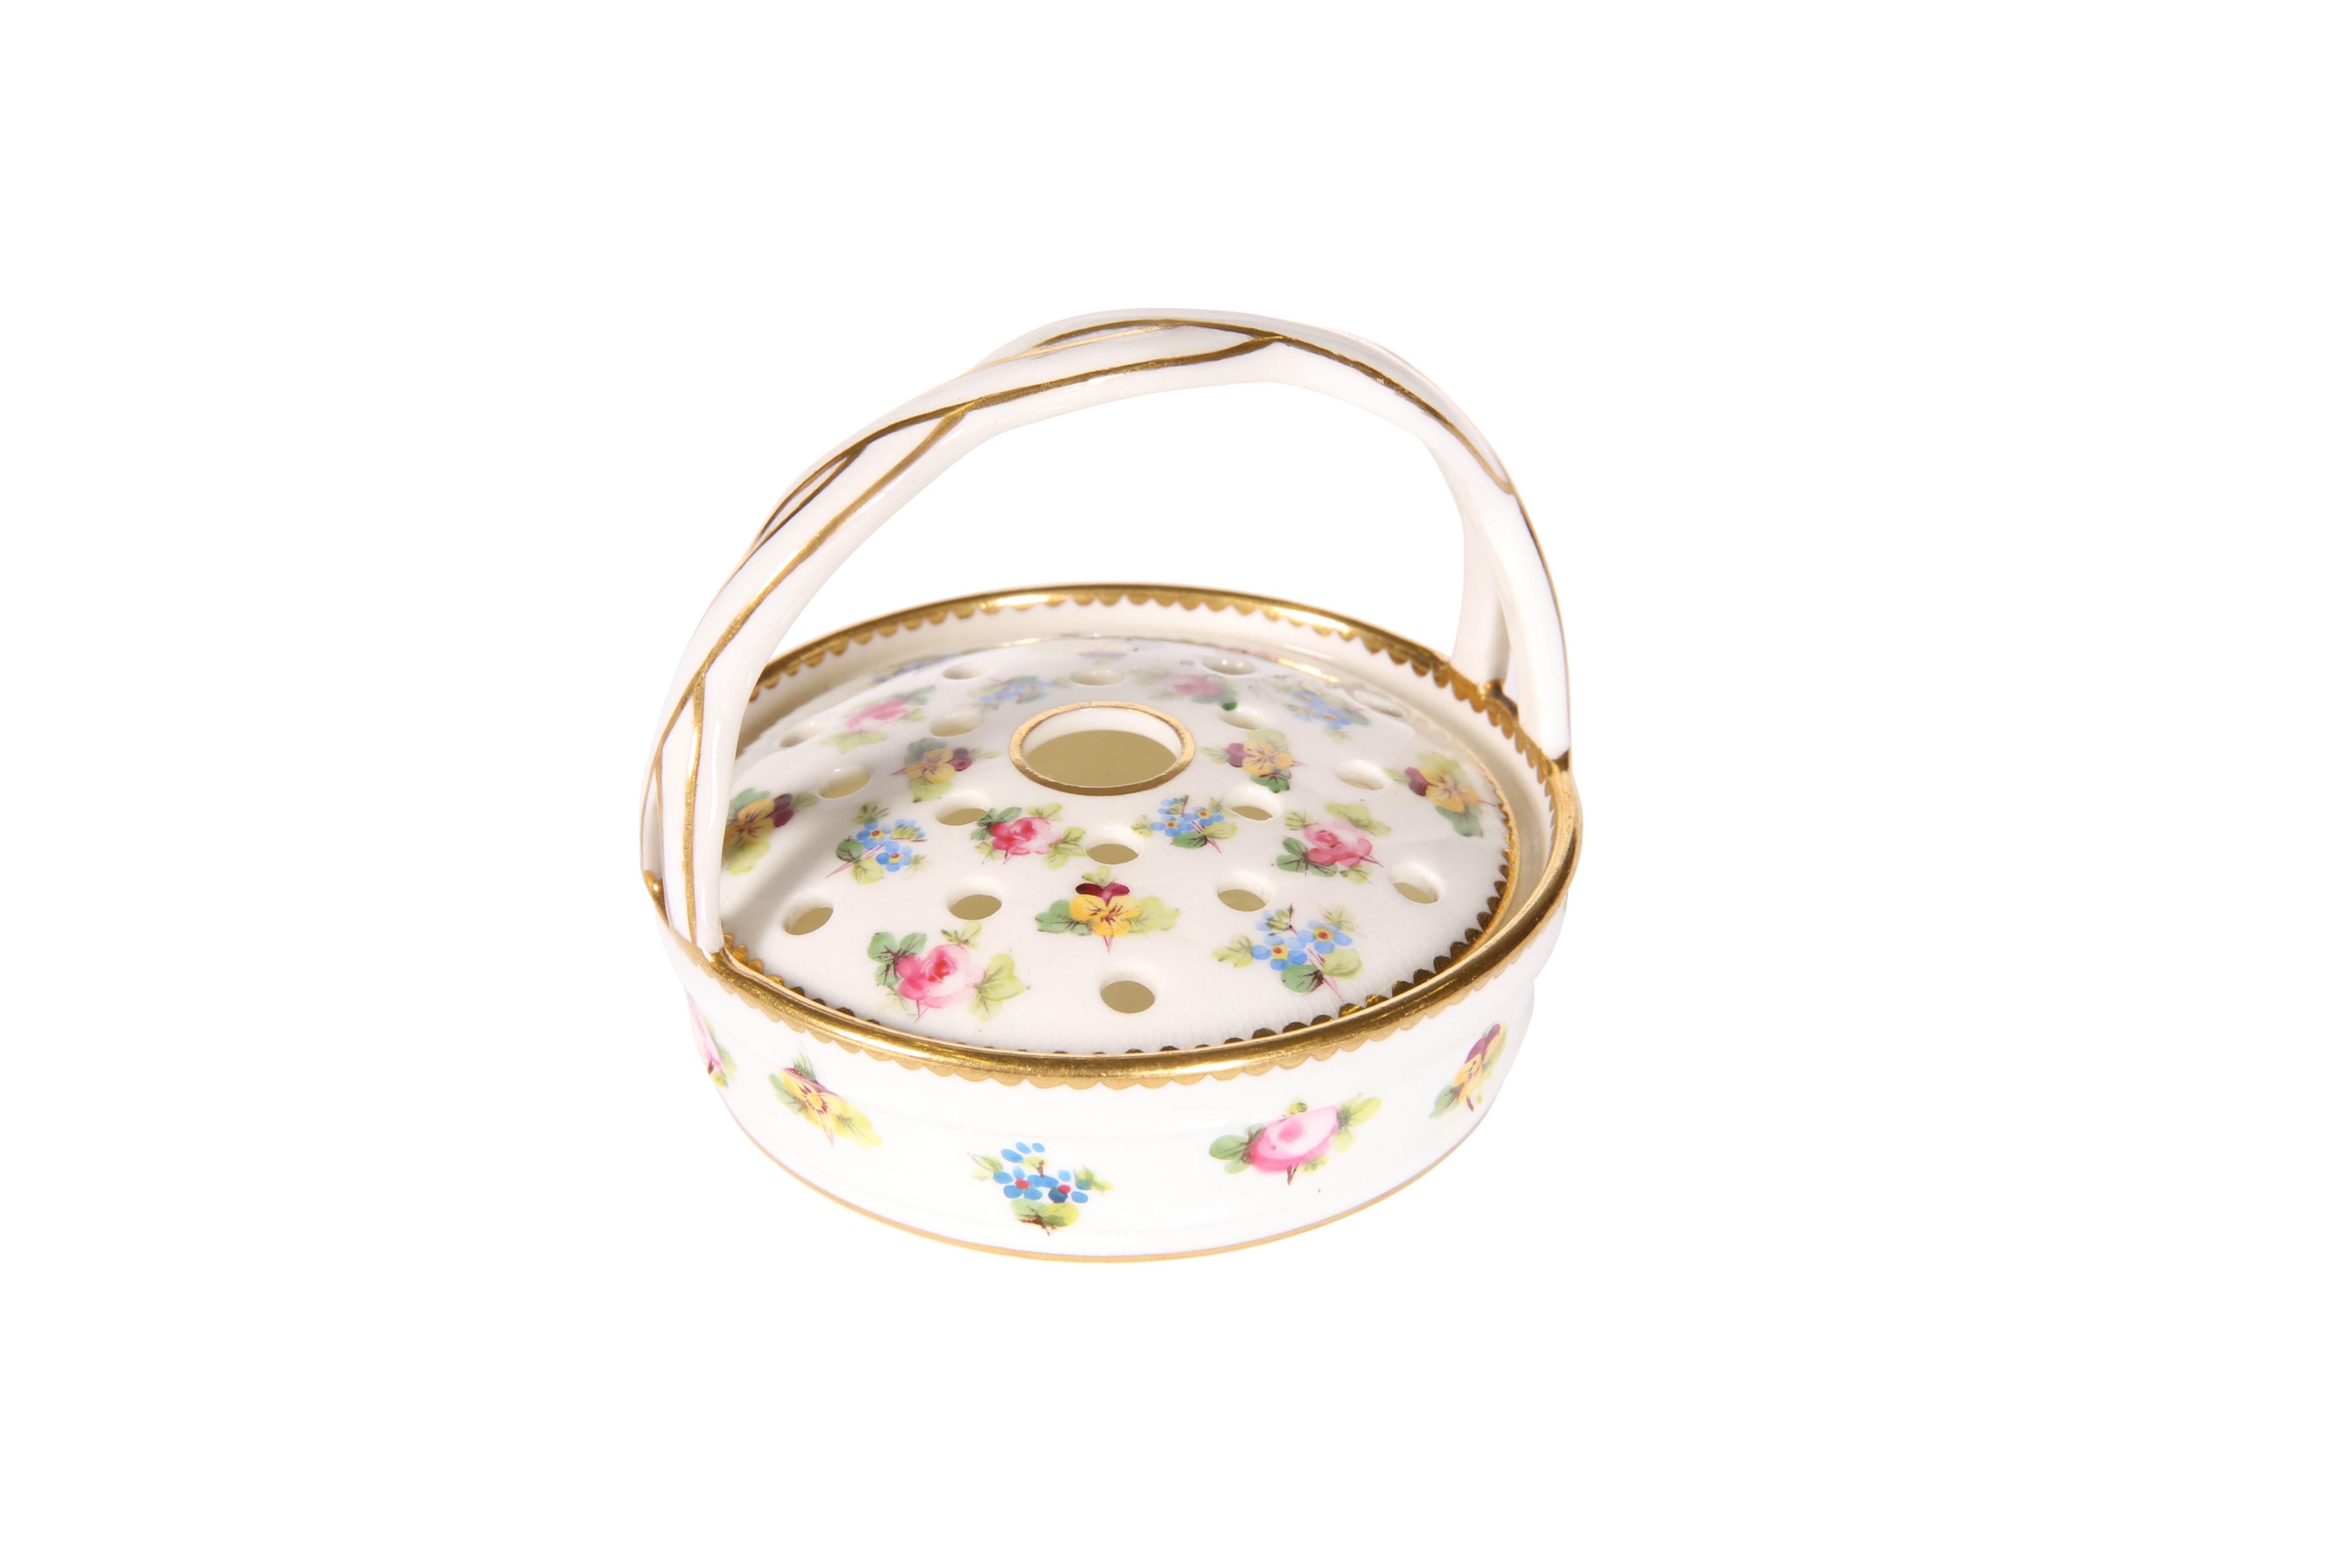 A MINTONS POSY HOLDER, c.1900